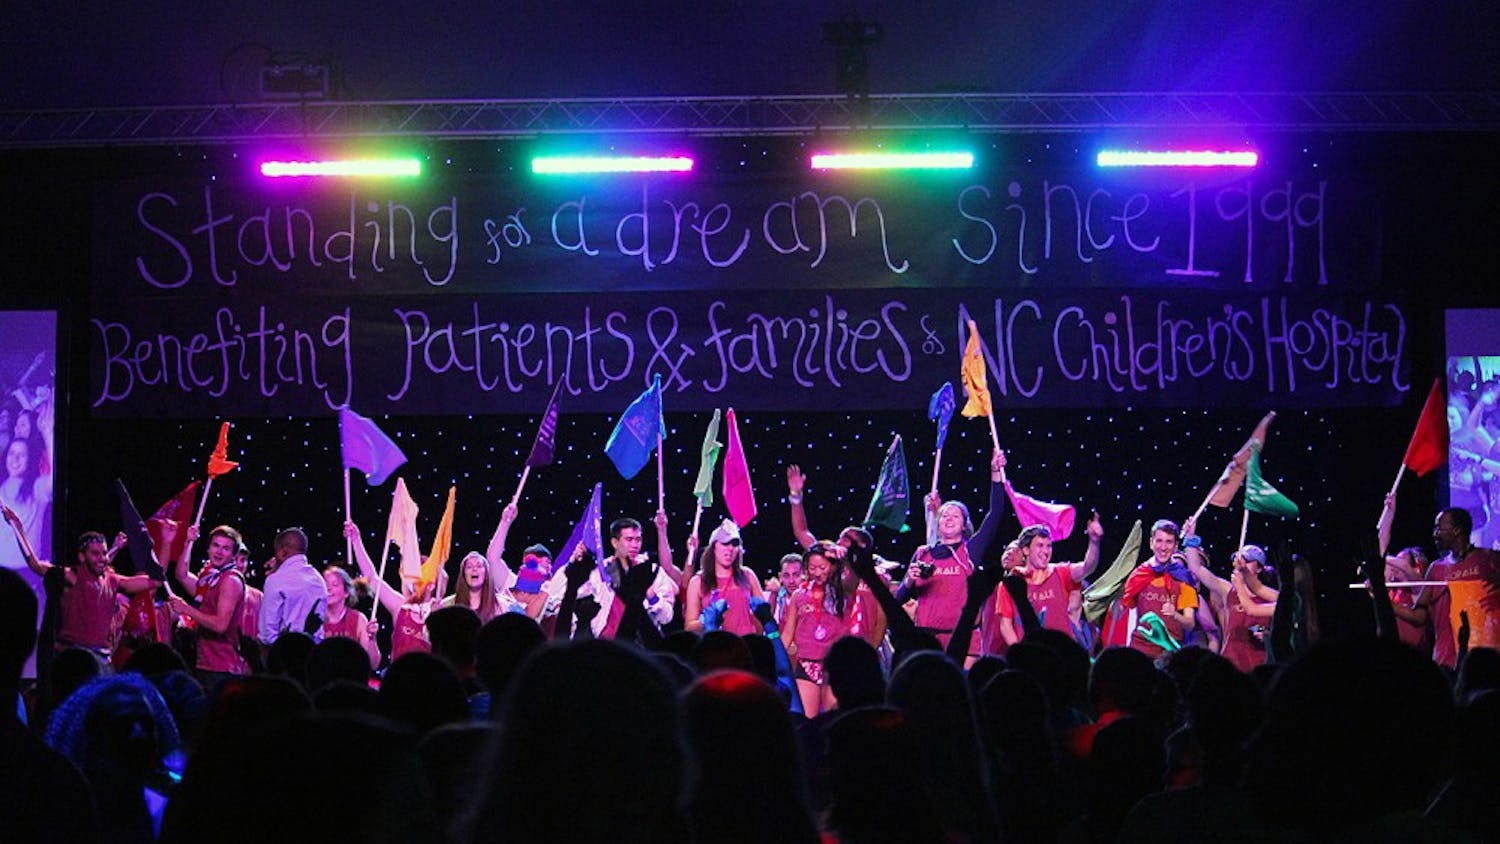 Students danced and stood for 24 hours to raise money for medical, surgical and emotional care of children and families served by North Carolina Children's Hospital. The 24-hour marathon began in Fetzer Gym on Mar. 21, 2014 and continued through Mar. 22.